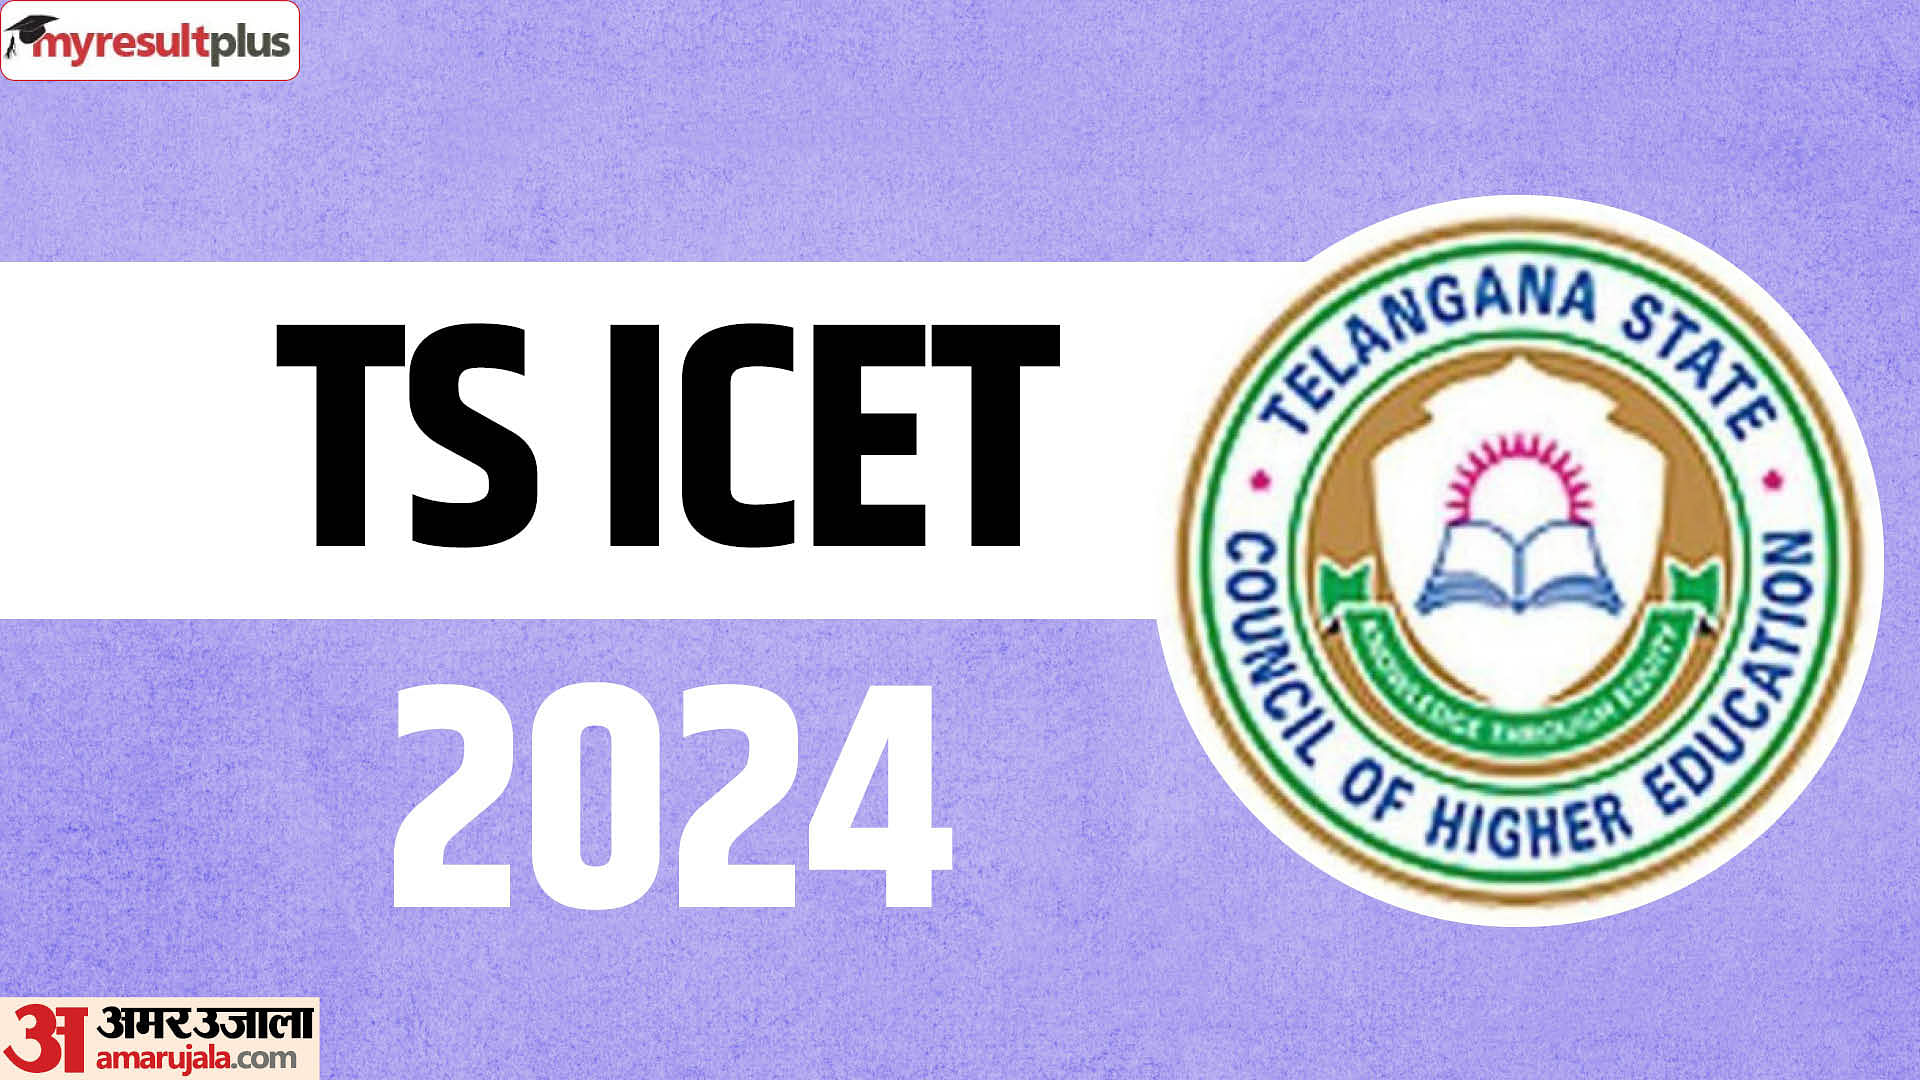 TS ICET 2024 registration window closing soon, Check admit card date and how to apply here